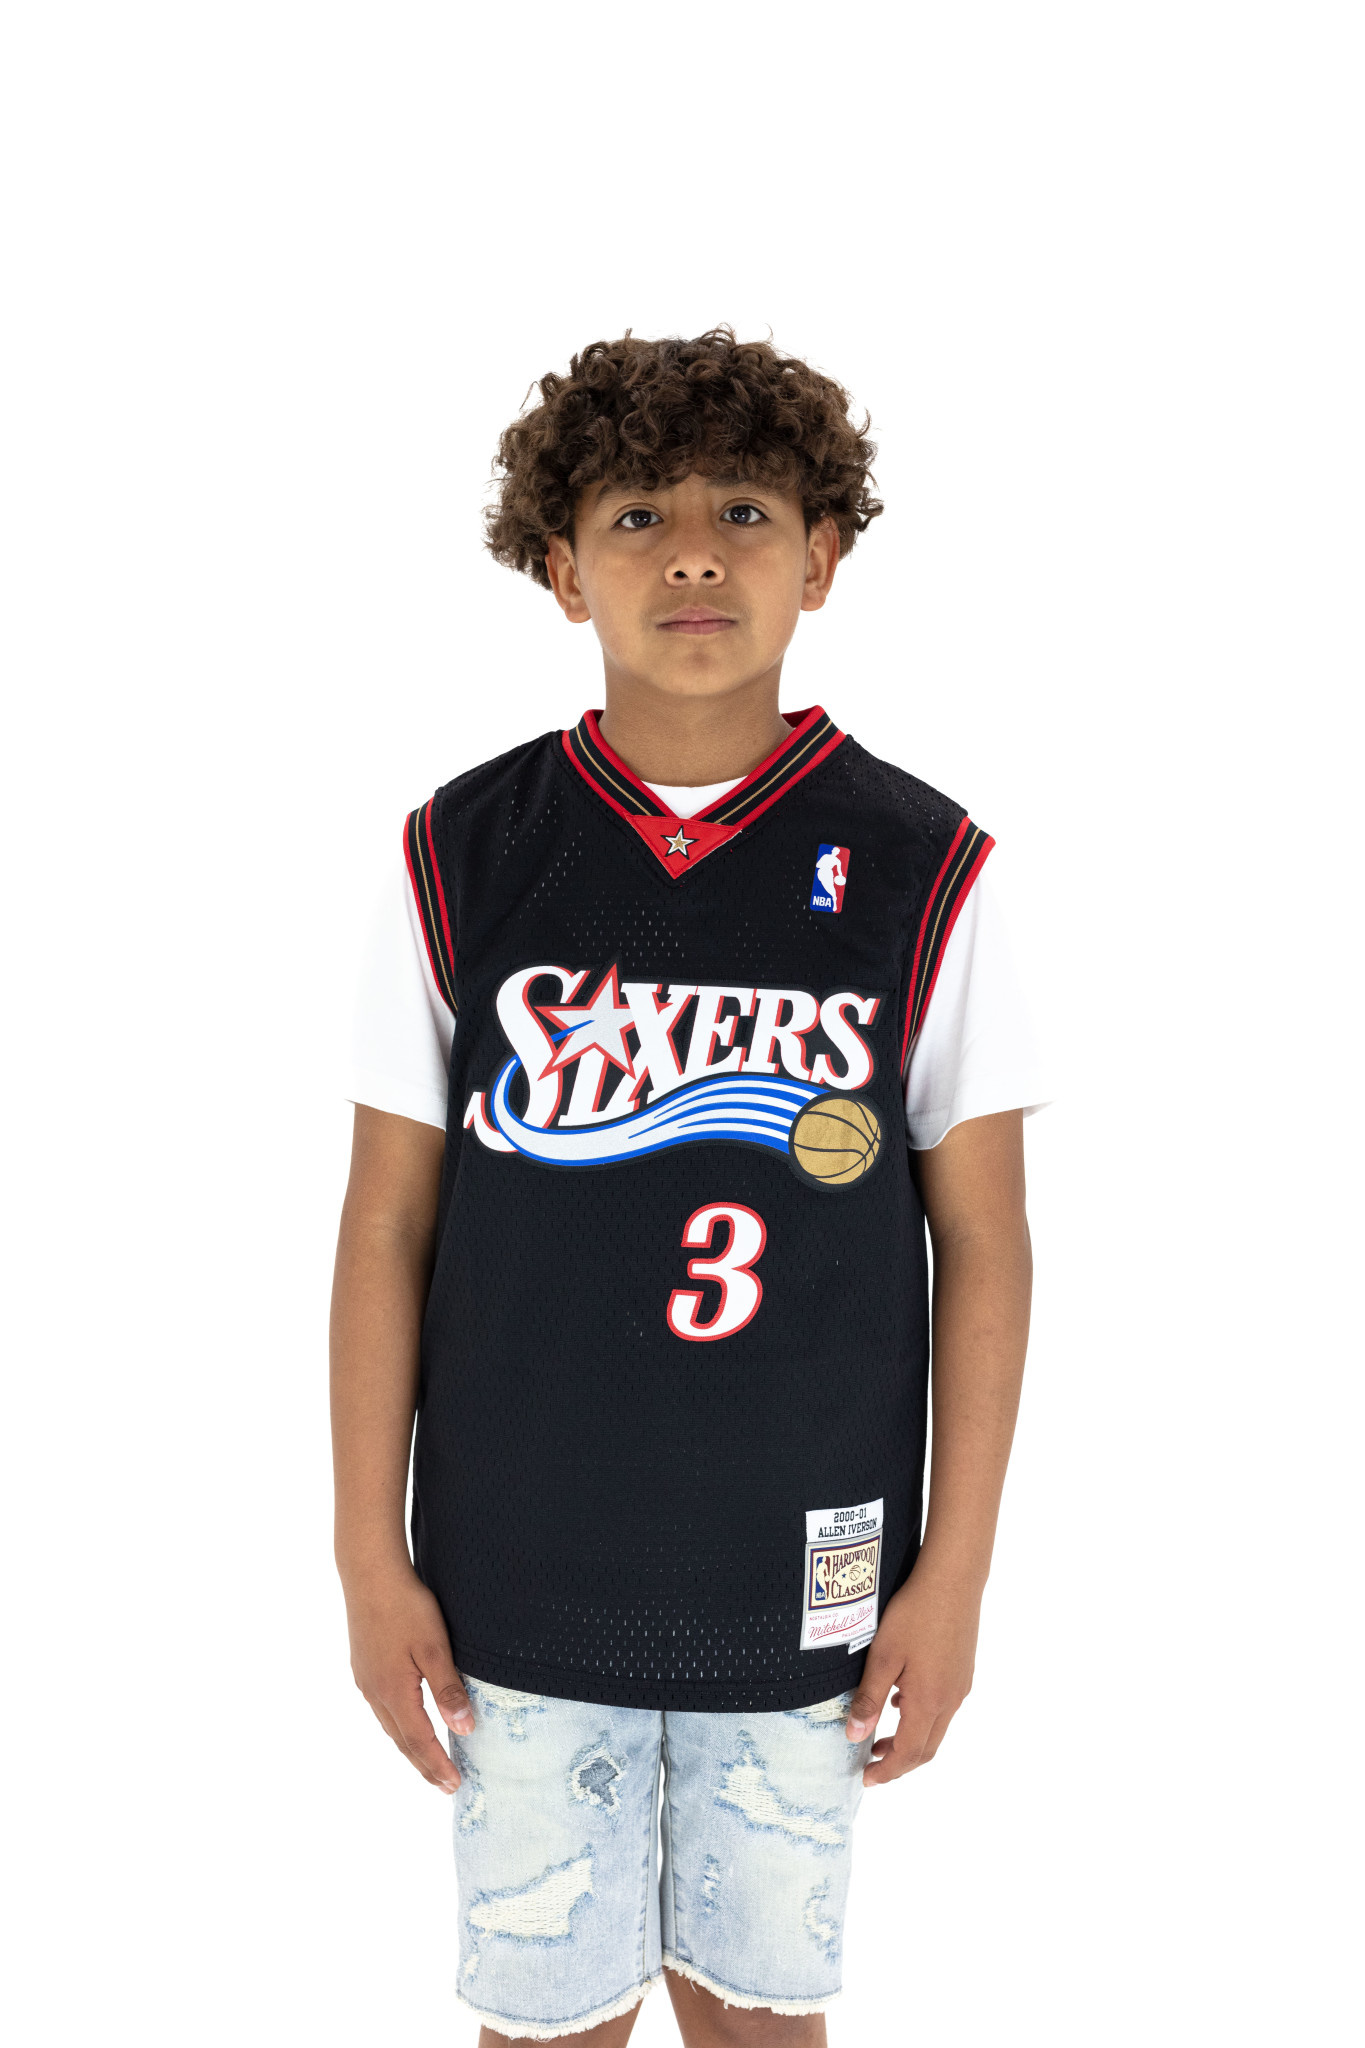 youth iverson jersey